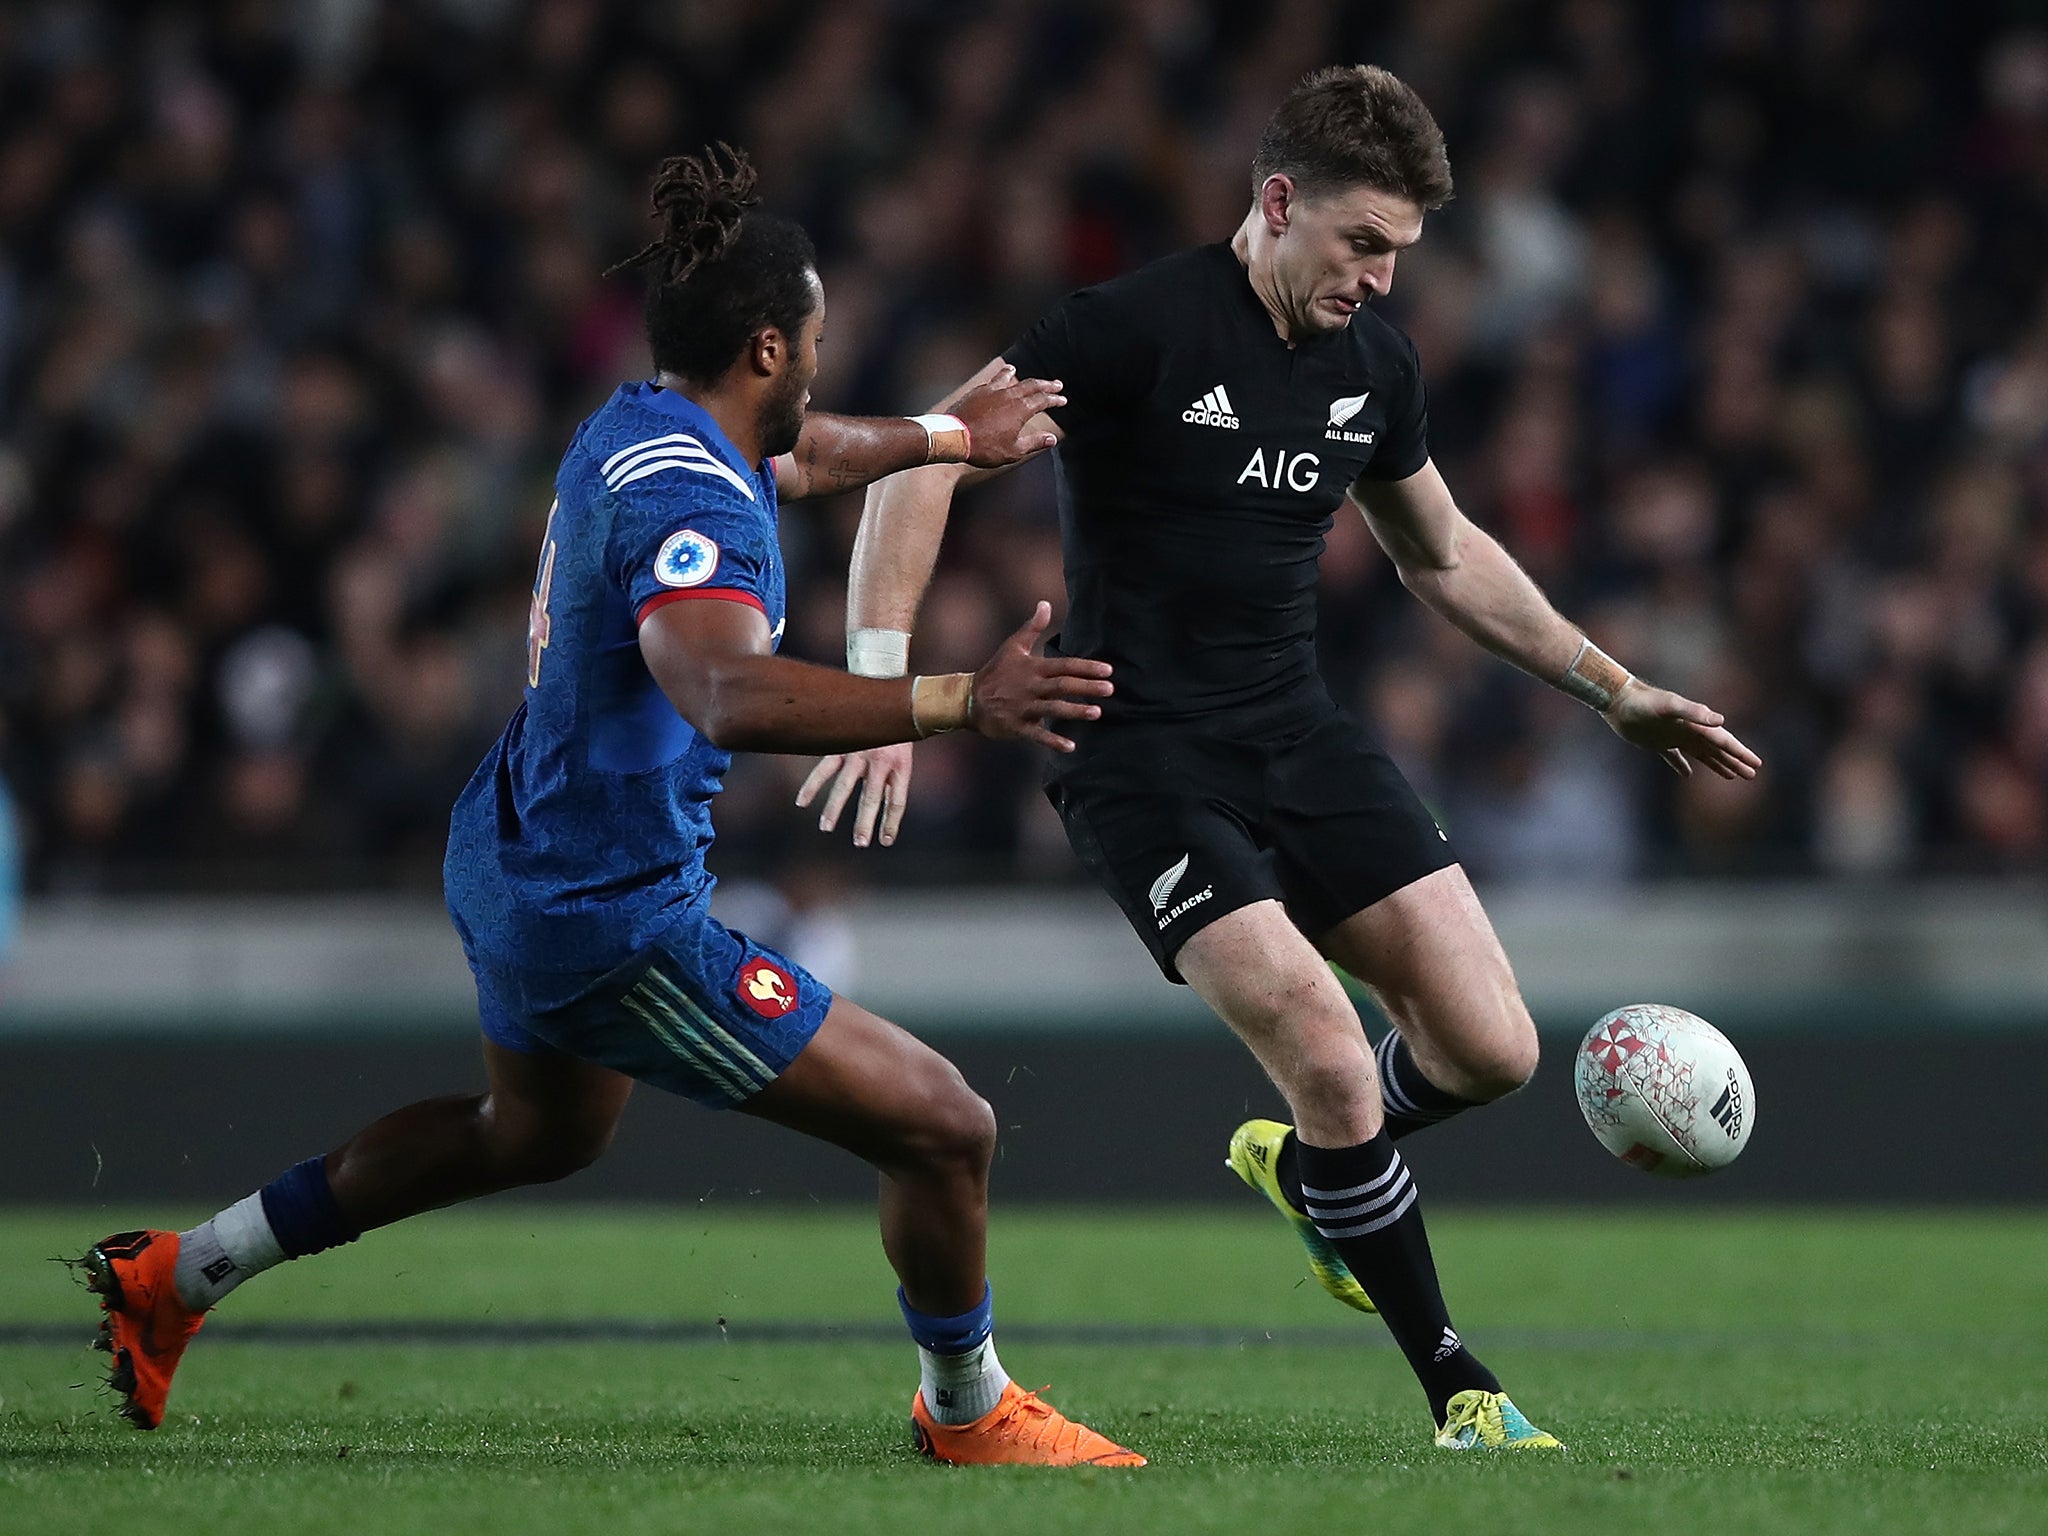 Beauden Barrett joined his two brothers Jordie and Scott in the All Blacks side